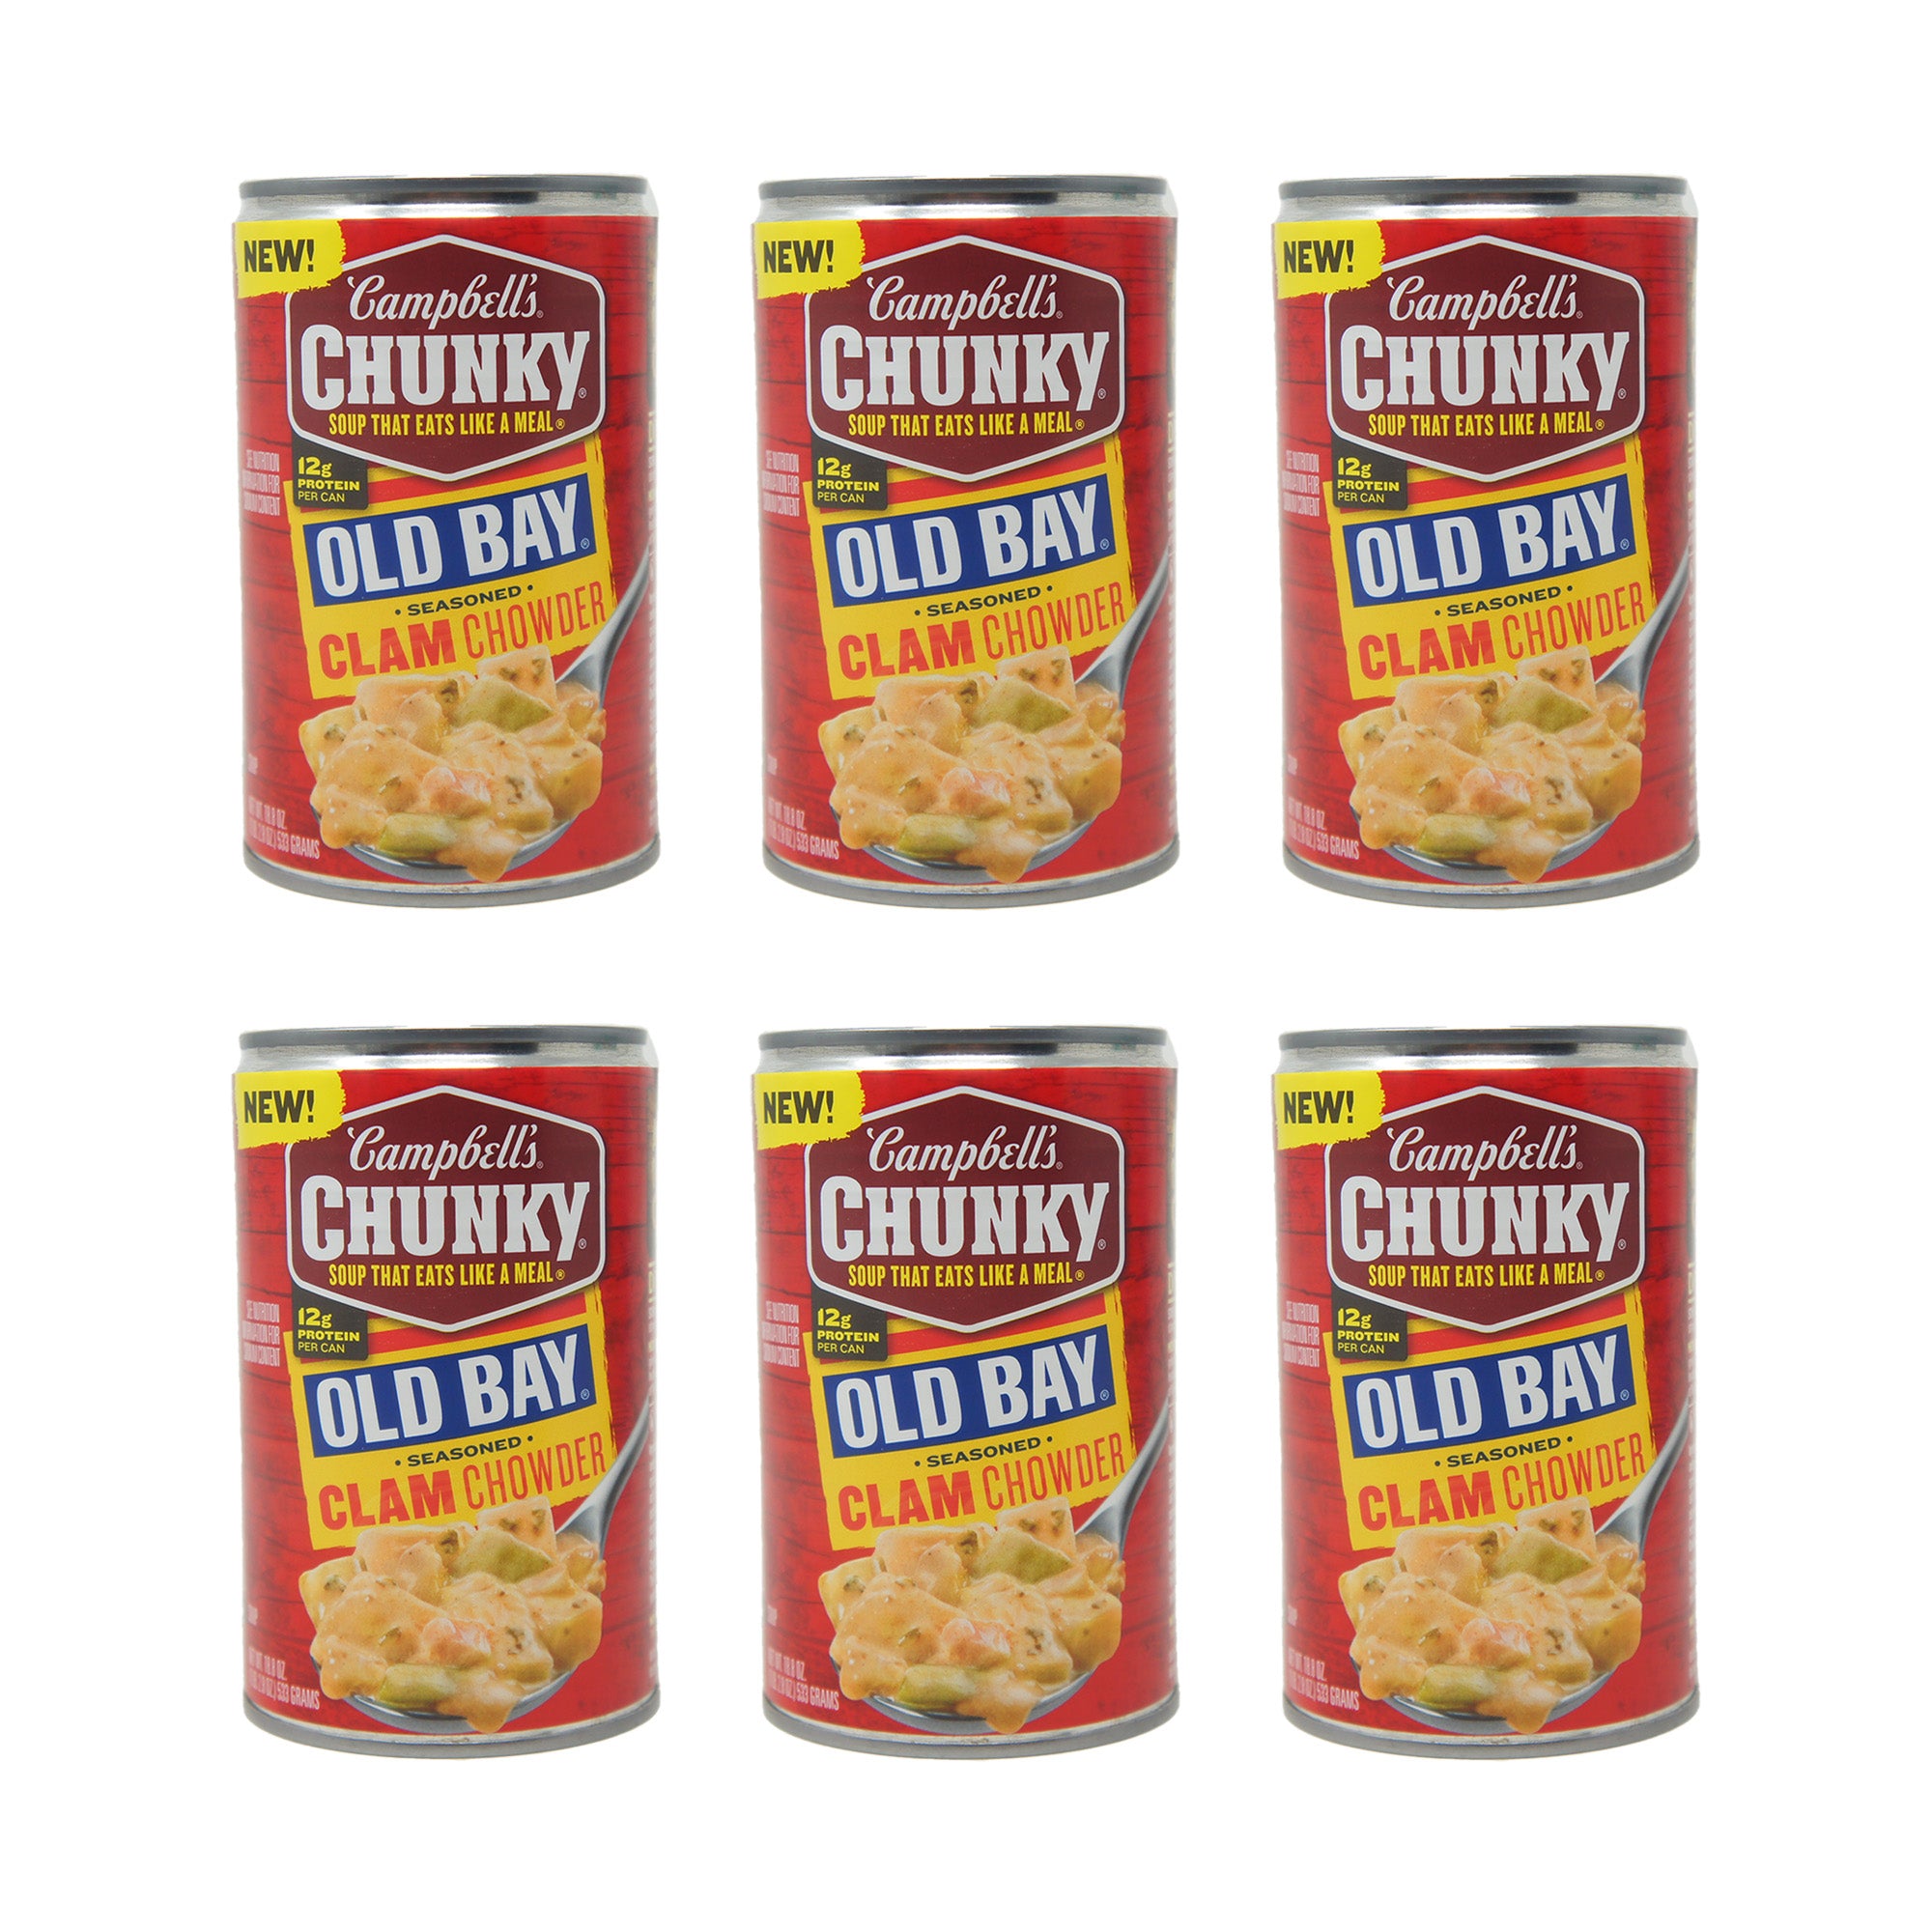 Campbell's Chunky Soup Clam Chowder Old Bay Seasoned, 18.8 oz Can (6 Pack)